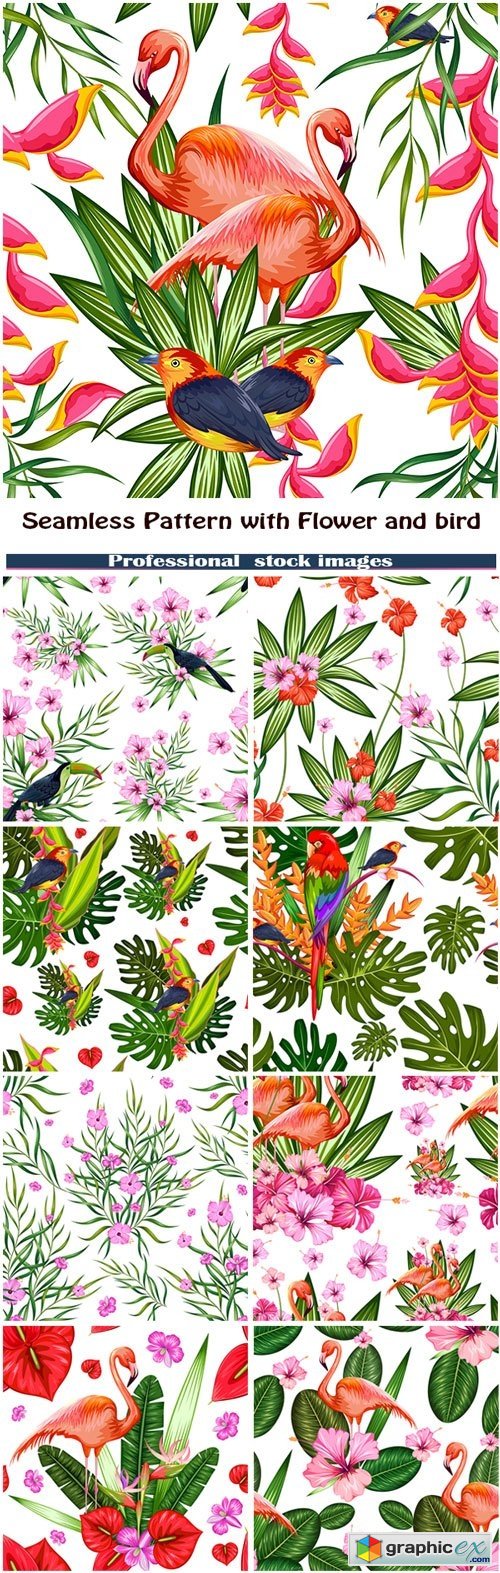 Seamless Pattern with Exotic Tropical Flower and colorful bird